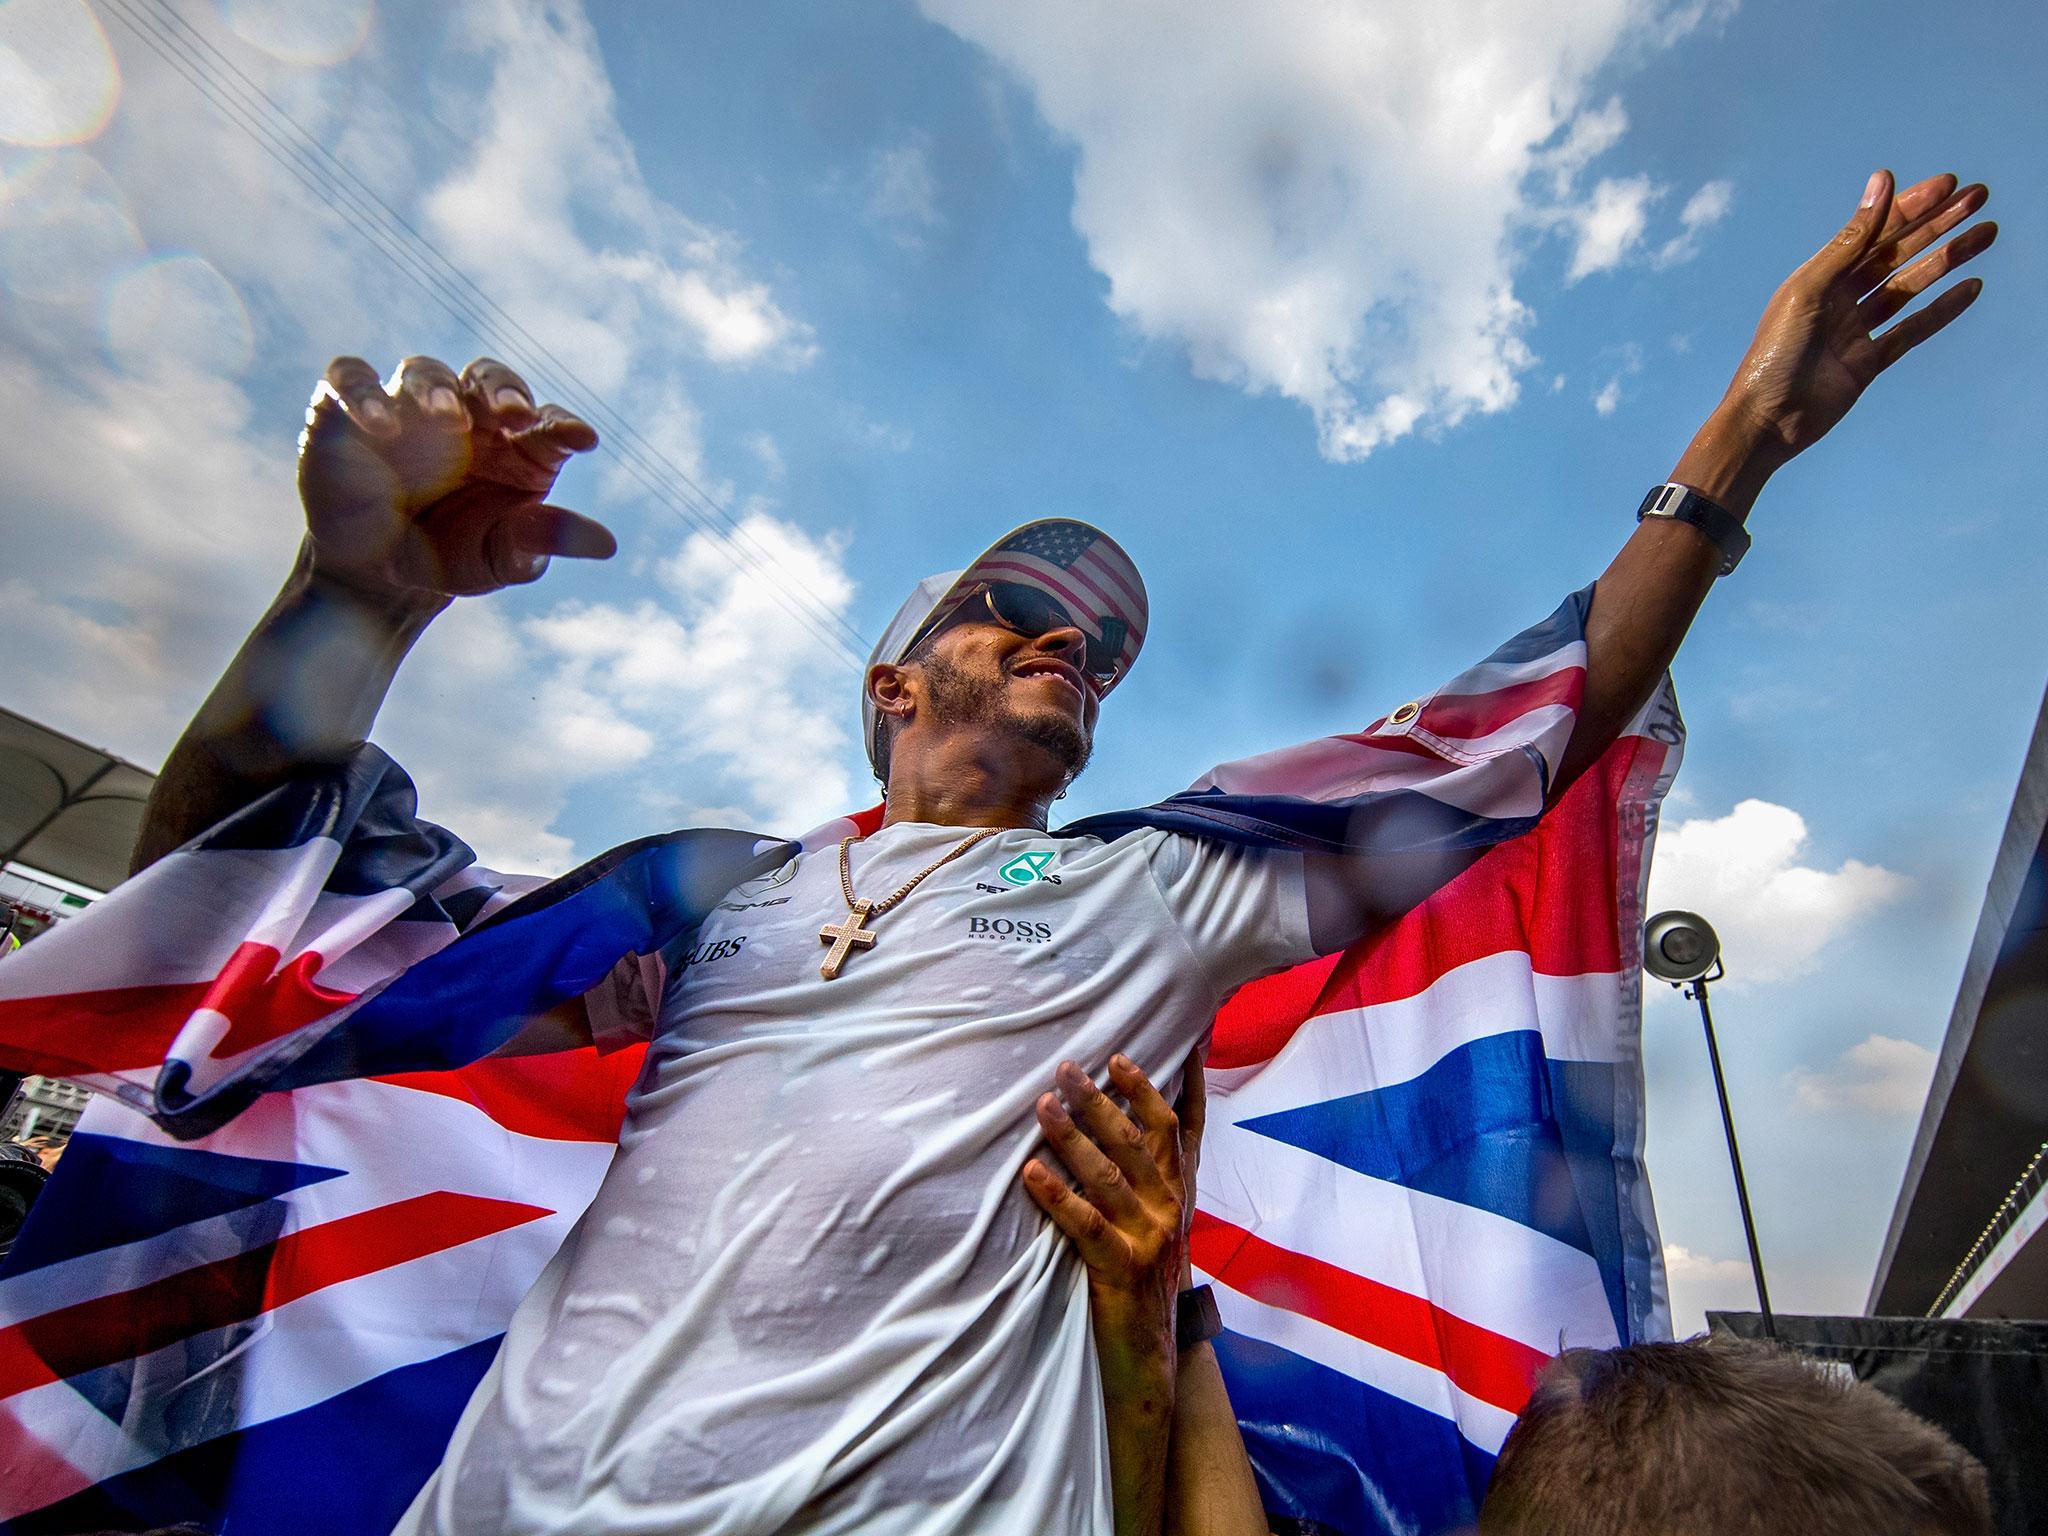 Lewis Hamilton is on top of the world after a fourth title